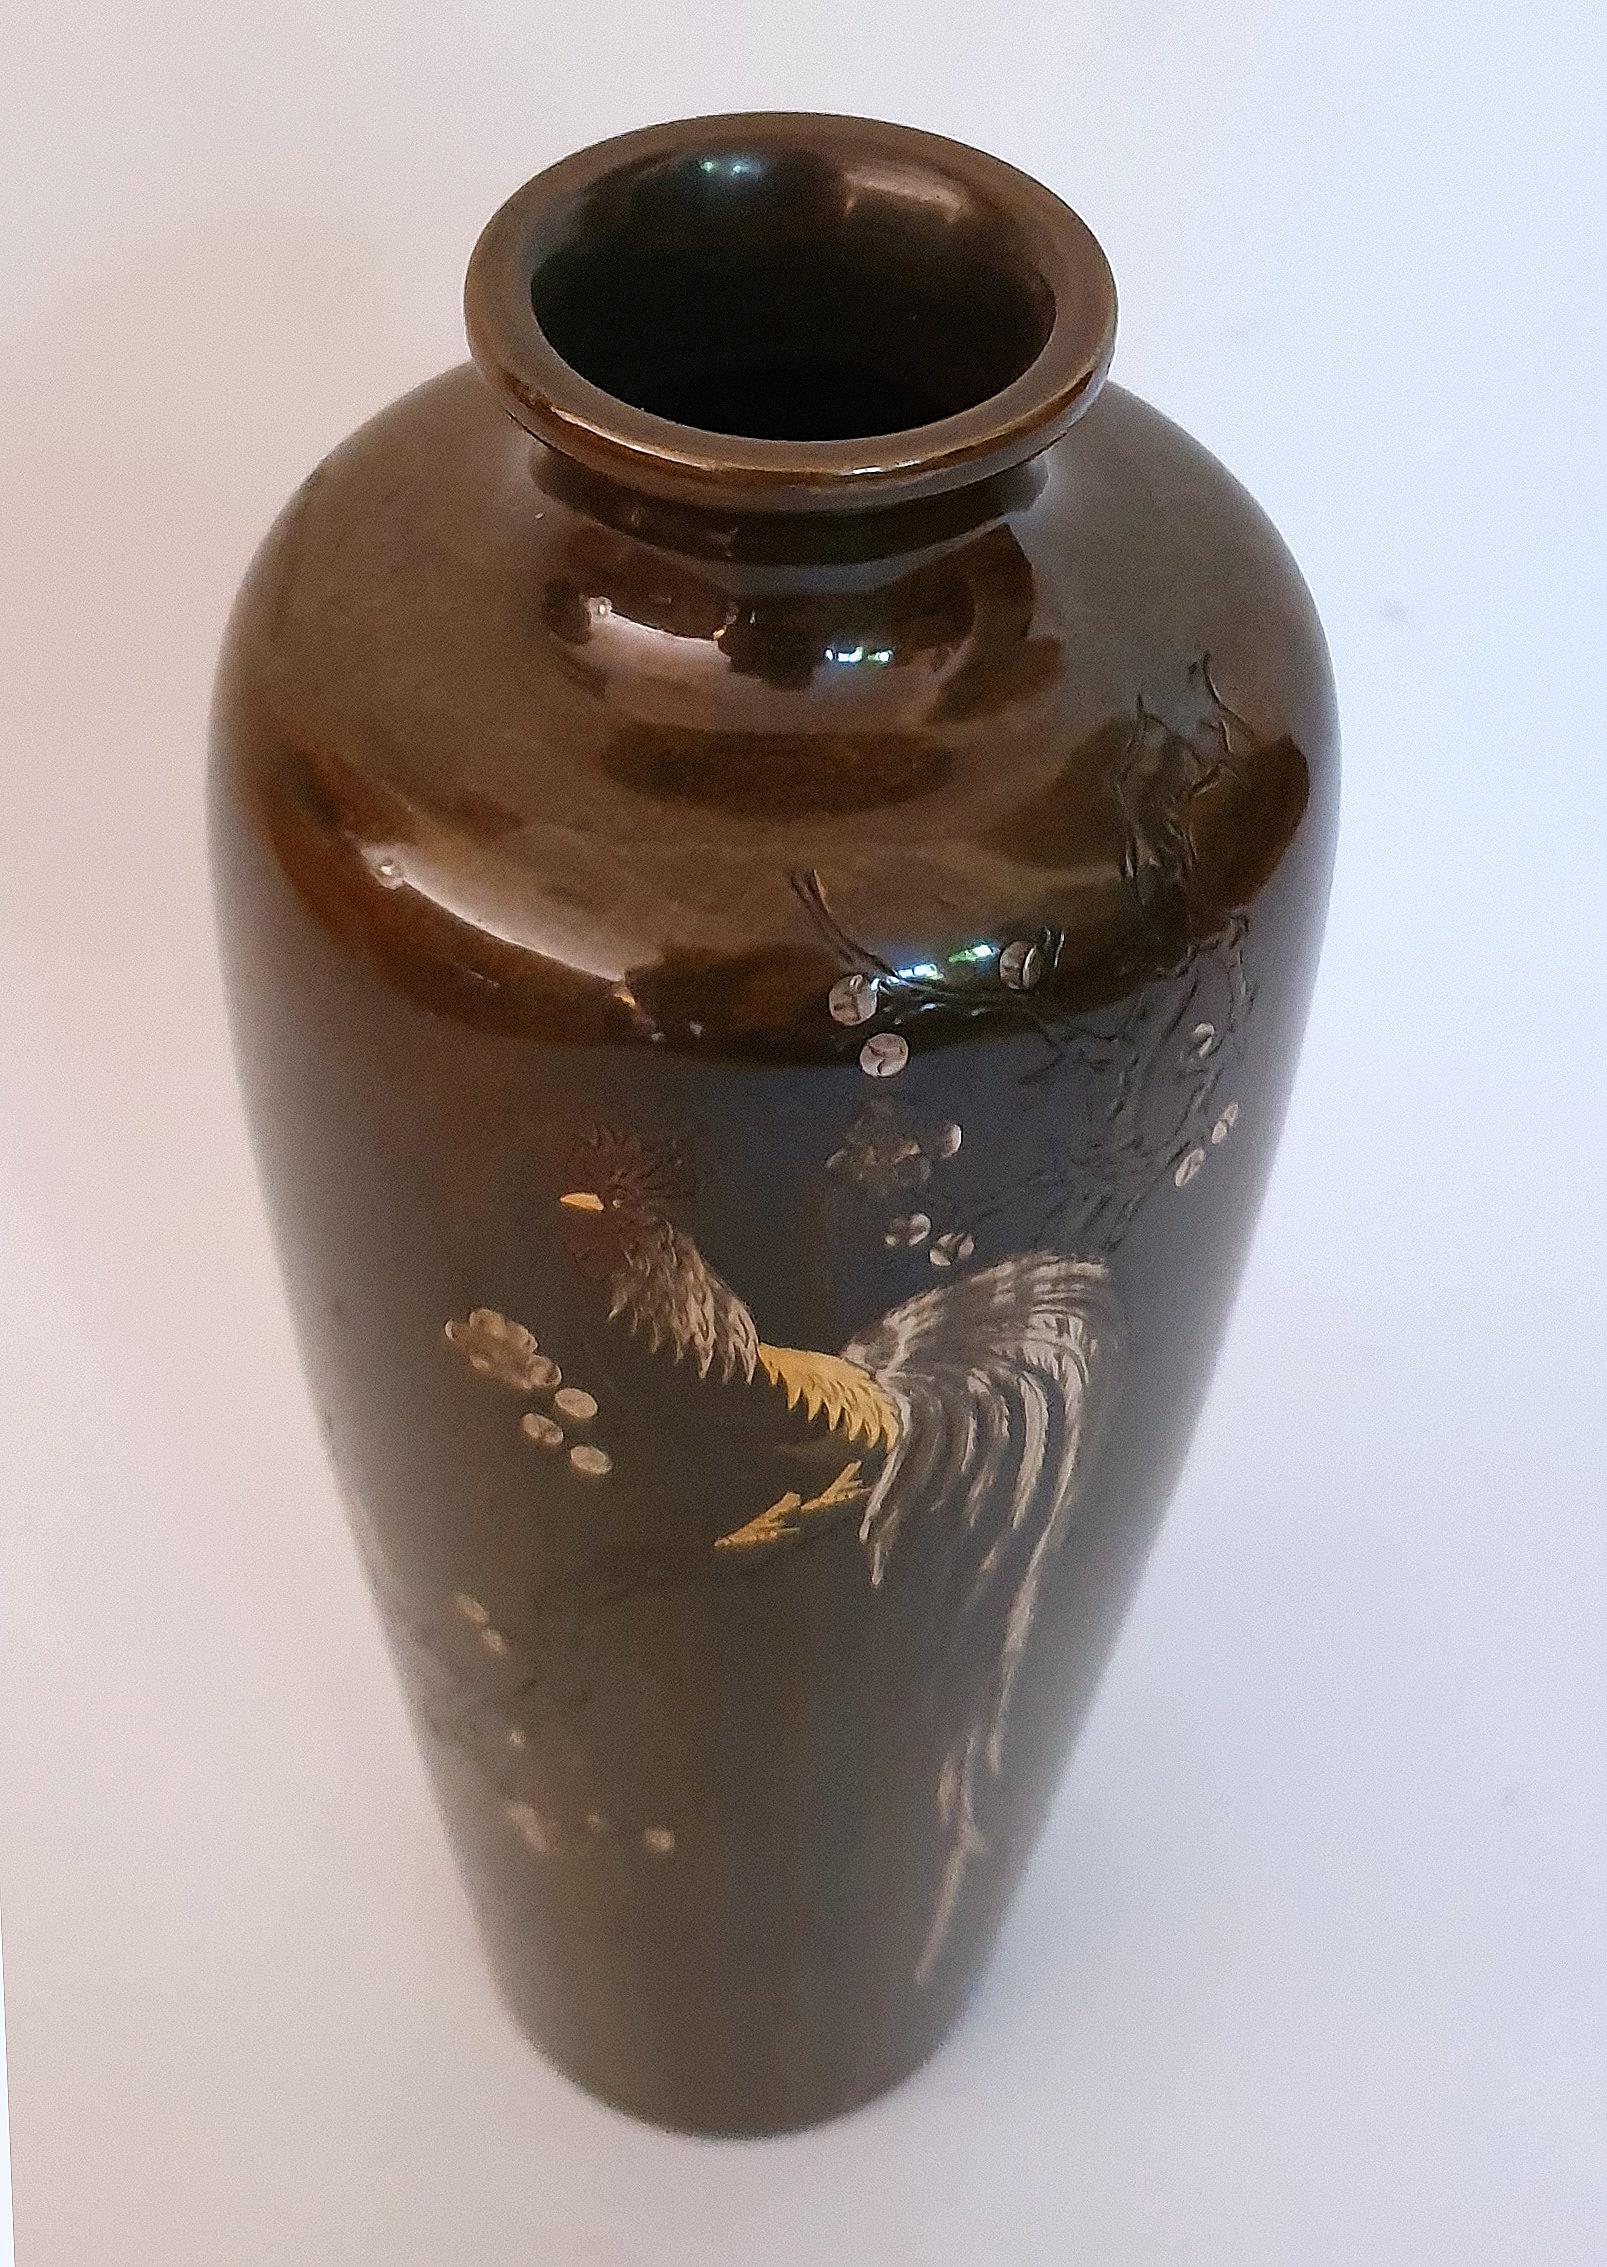 A 19th century Japanese Meiji period marinated bronze vase inlaid with gold and silver depicting an exotic bird perched on a blossoming branch. The vase is signed to the side of the vase and to the underneath. It measures 7 in – 17.8 cm high, 3 in –